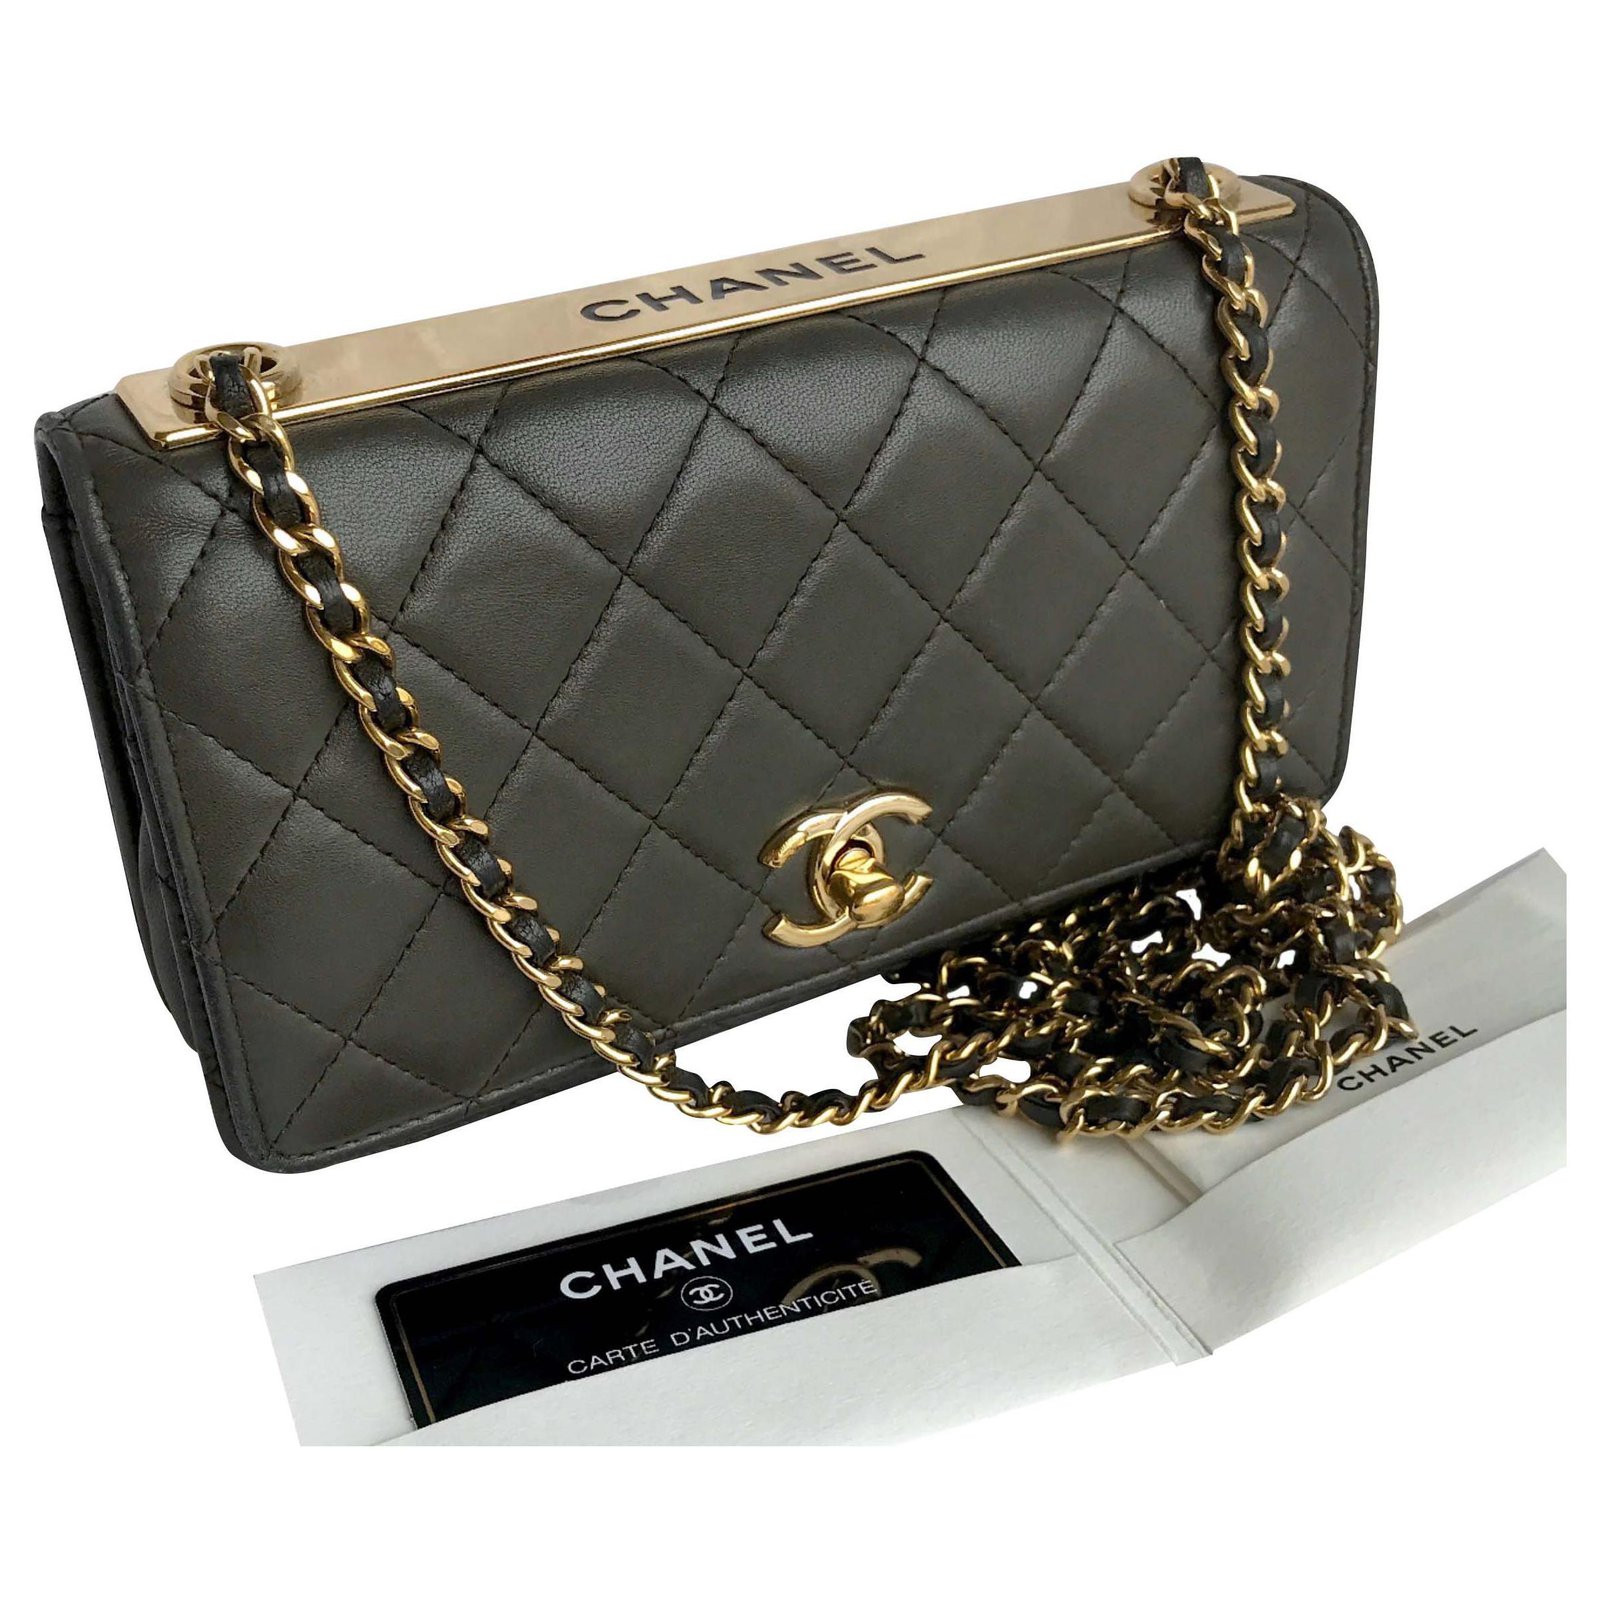 19 Chanel Wallet on a Chain Outfits ideas  chanel wallet chain outfit  chanel bag